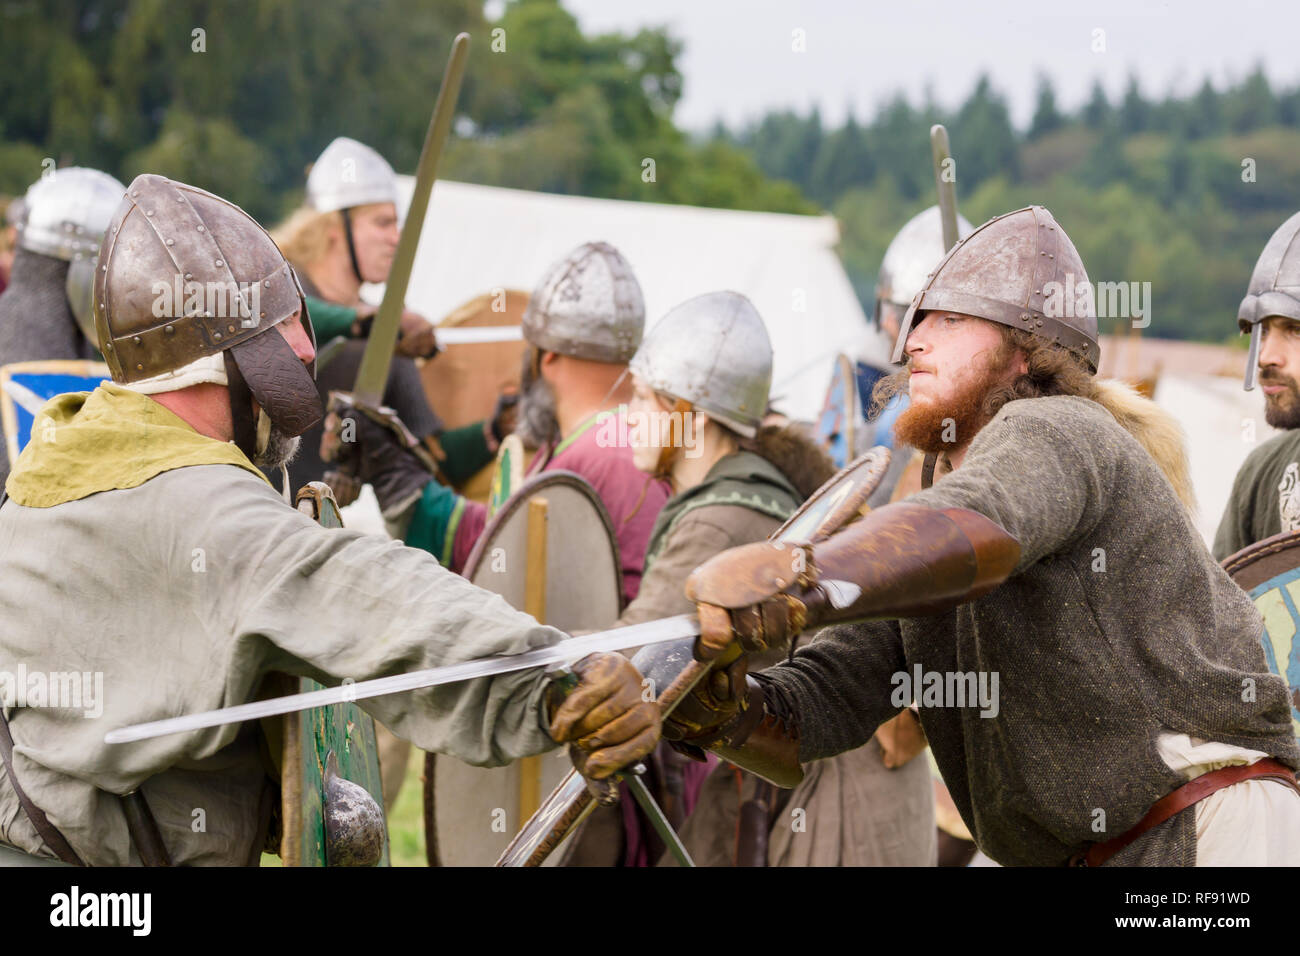 Medieval re-enactors dressed in armour and costumes of the 12th century equipped with swords and shields re-enacting combat of the period Stock Photo